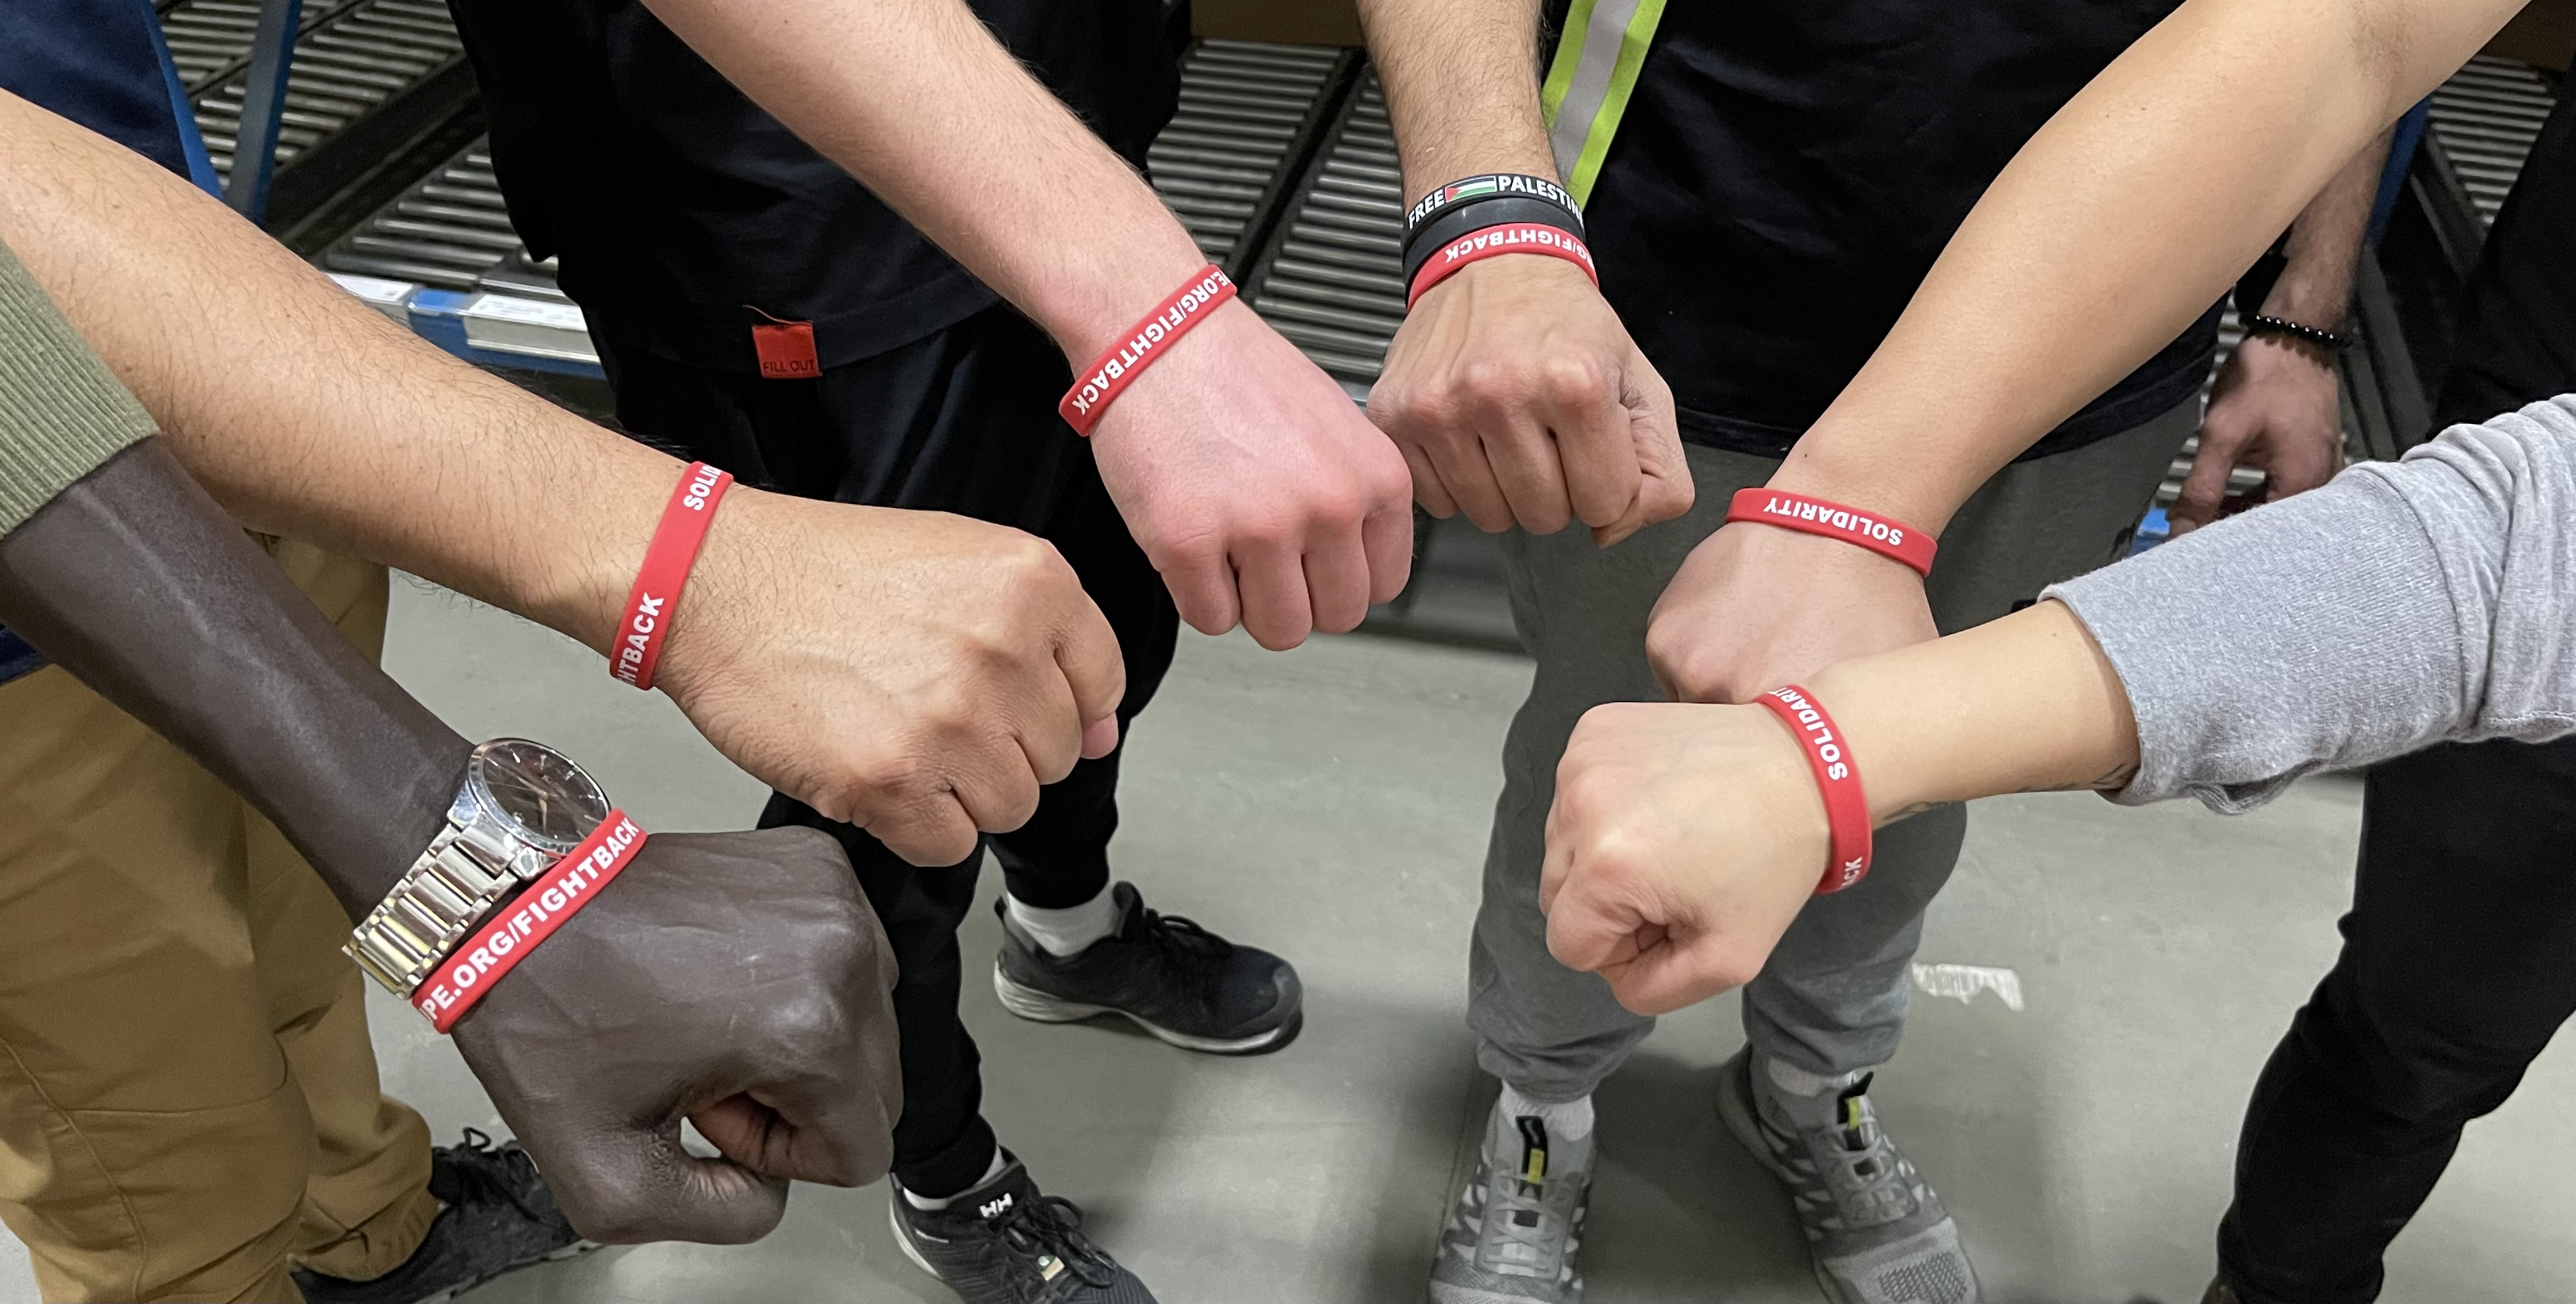 Members wearing red AUPE wristbands make a circle with their fists.